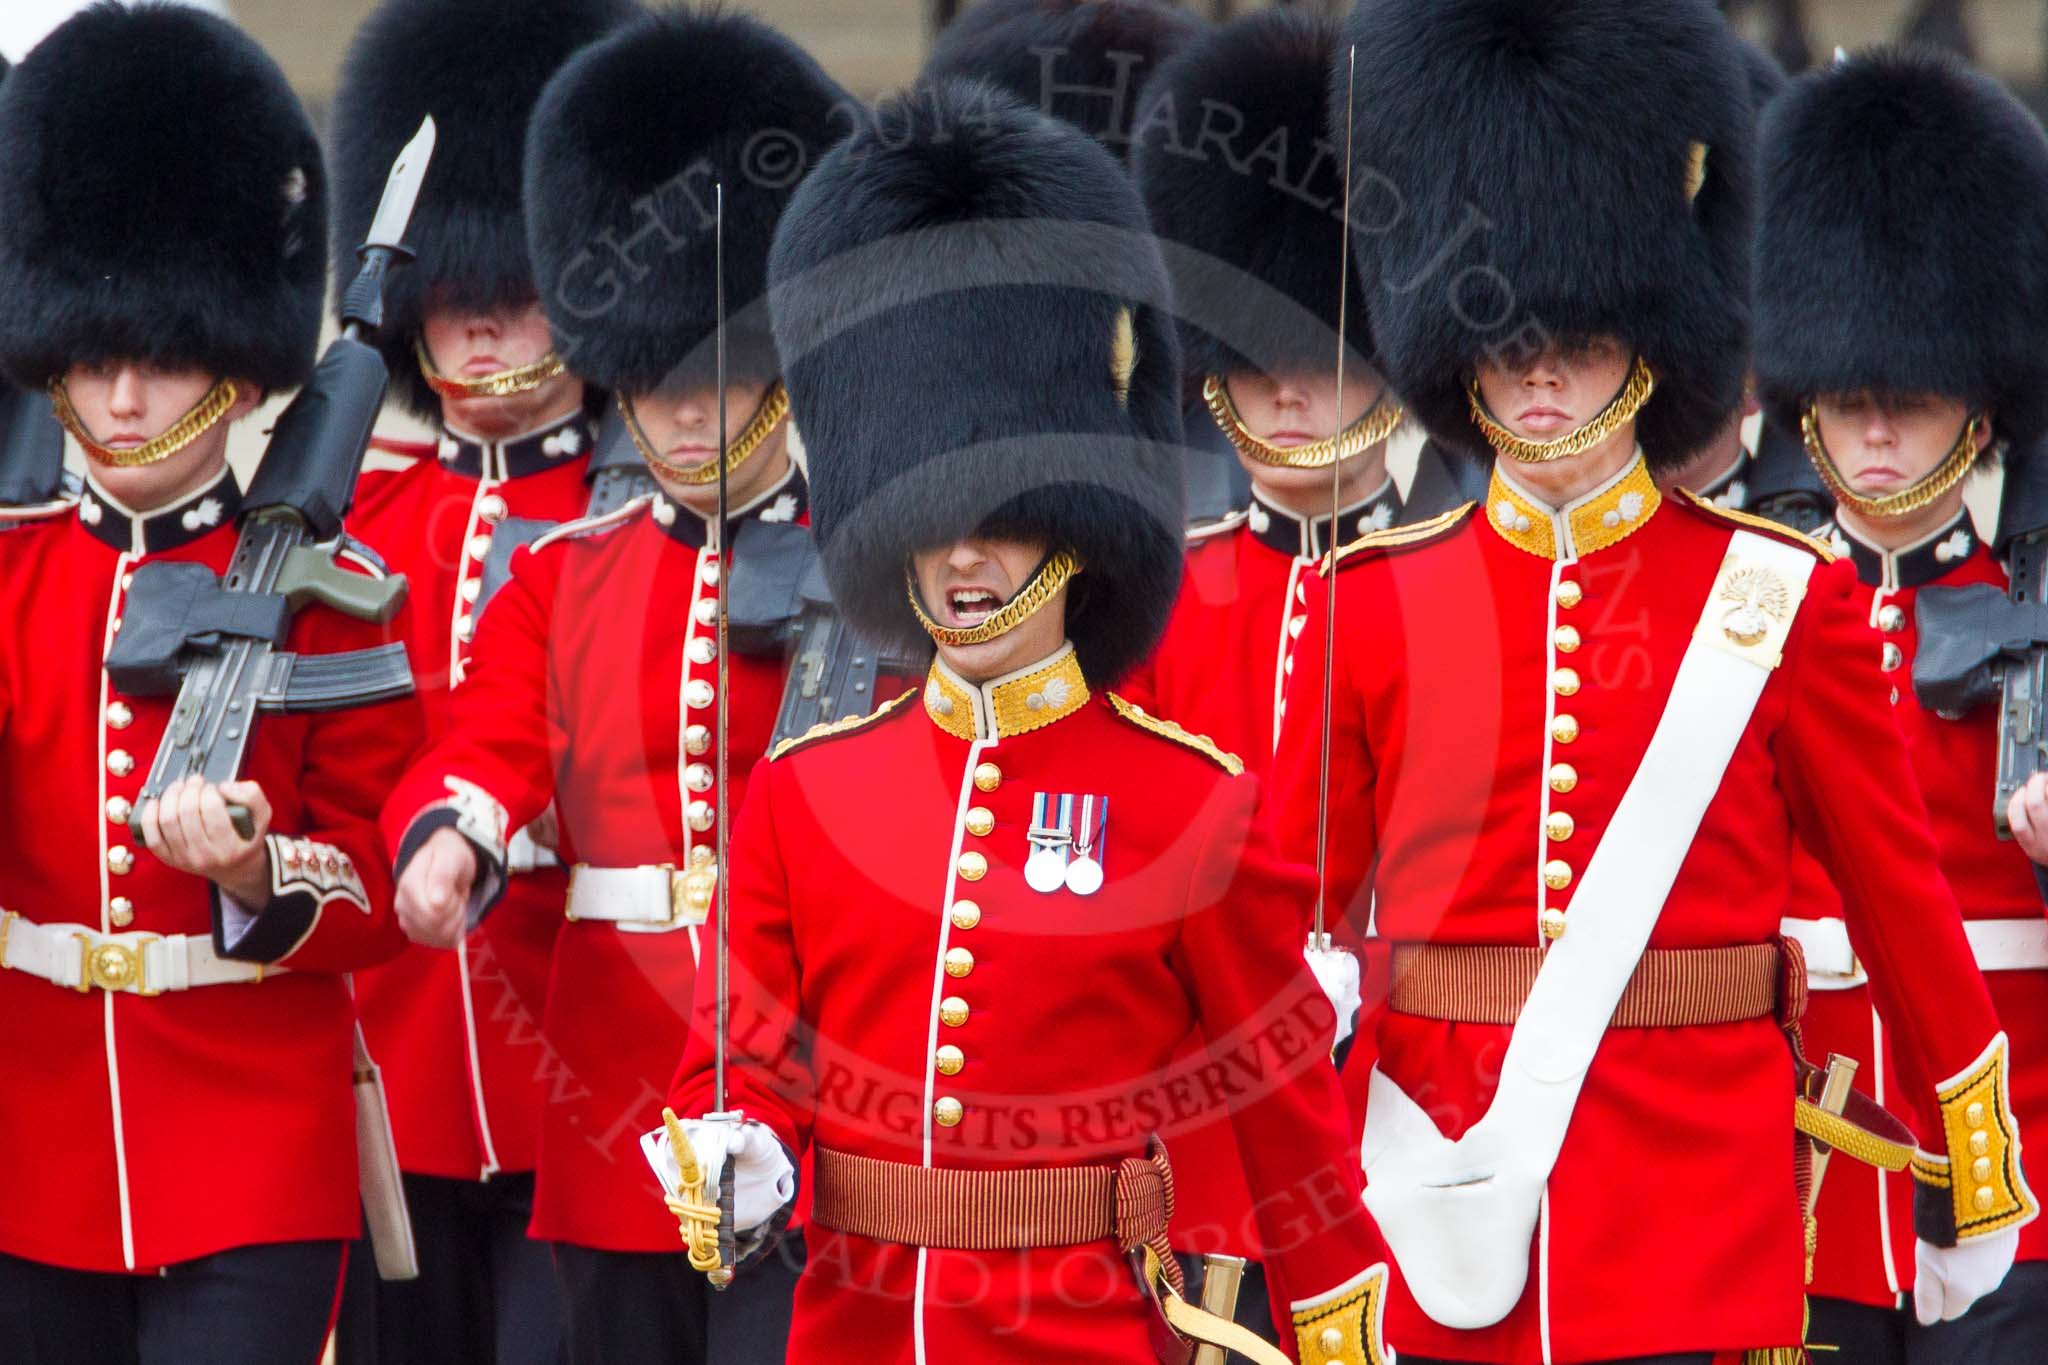 Trooping the Colour 2014.
Horse Guards Parade, Westminster,
London SW1A,

United Kingdom,
on 14 June 2014 at 11:18, image #504